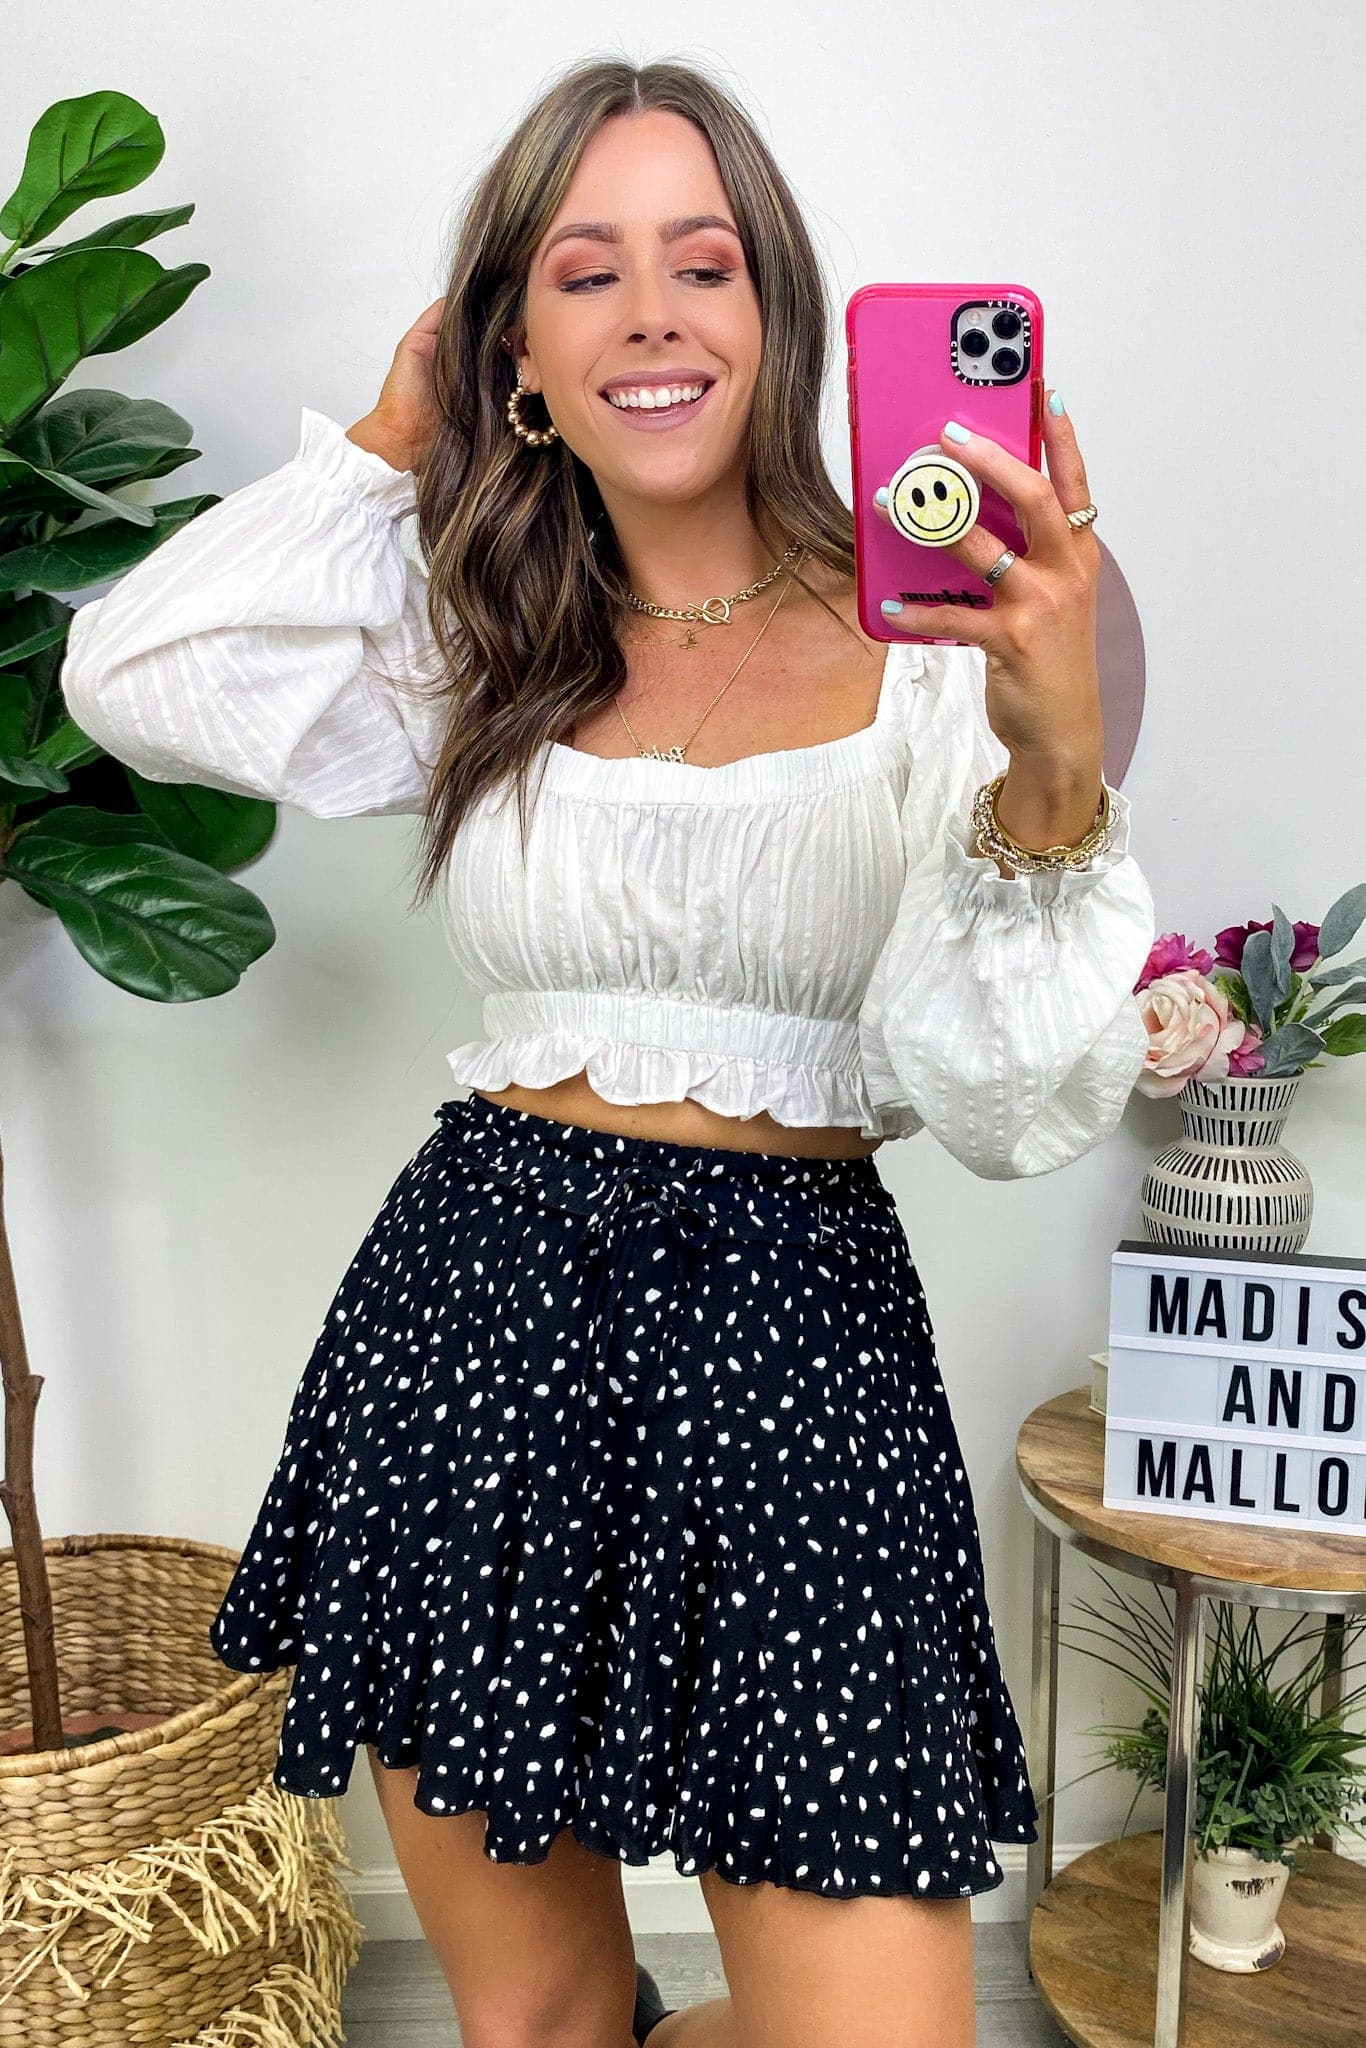  Eclectic Charm Square Neck Ruffle Crop Top - FINAL SALE - Madison and Mallory